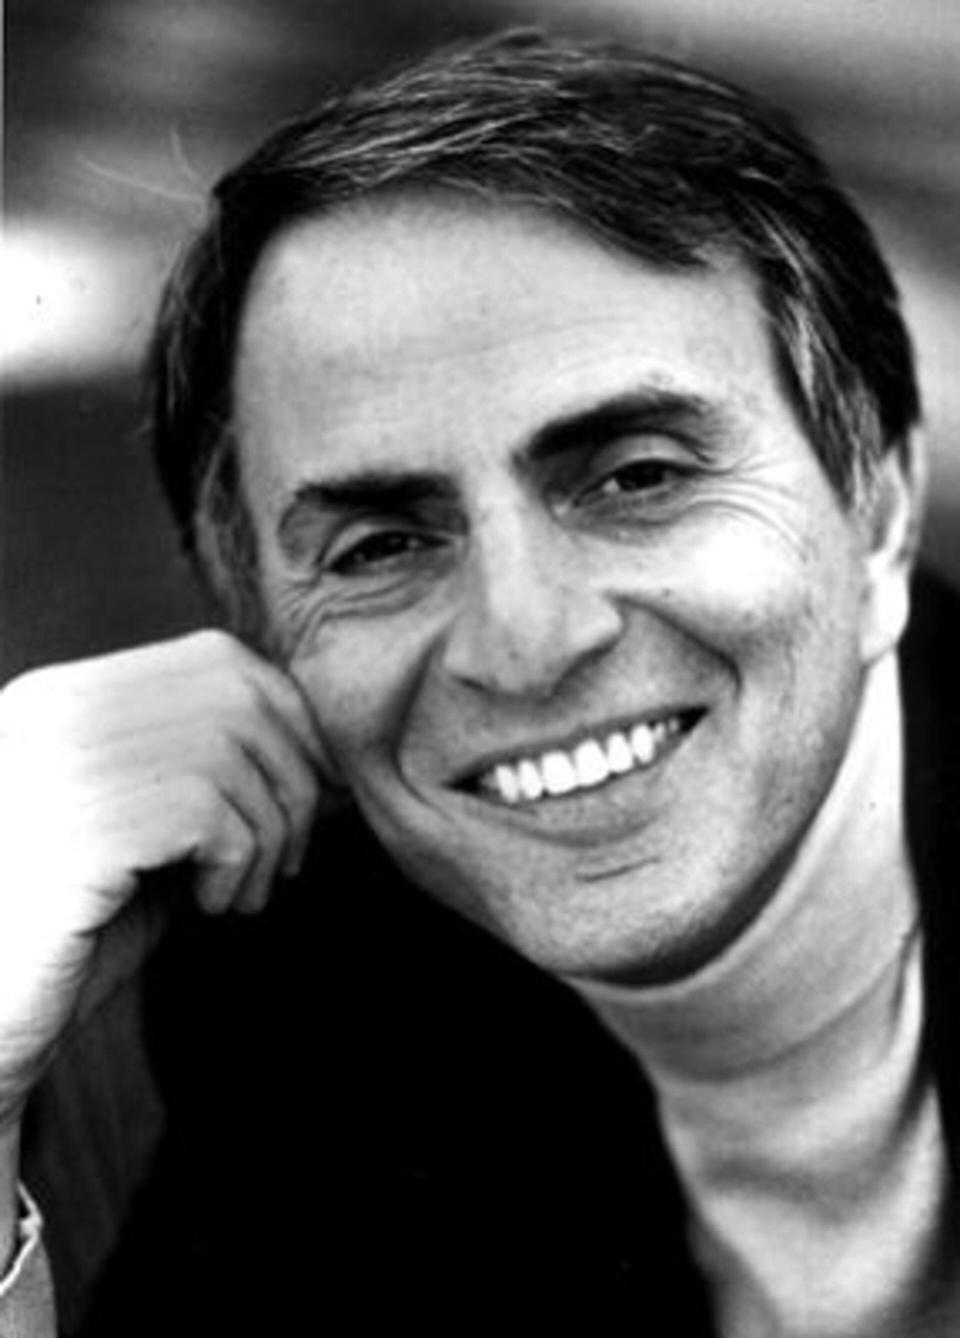 Carl Sagan, pictured here, is known for his bevy of inspirational quotes including the following: “For small creatures such as we, the vastness [of the universe] is made bearable only through love,” Sagan said, years before his struggles with cancer (myelodysplasia) and a case of pneumonia took his life in 1996, at the age of 62.